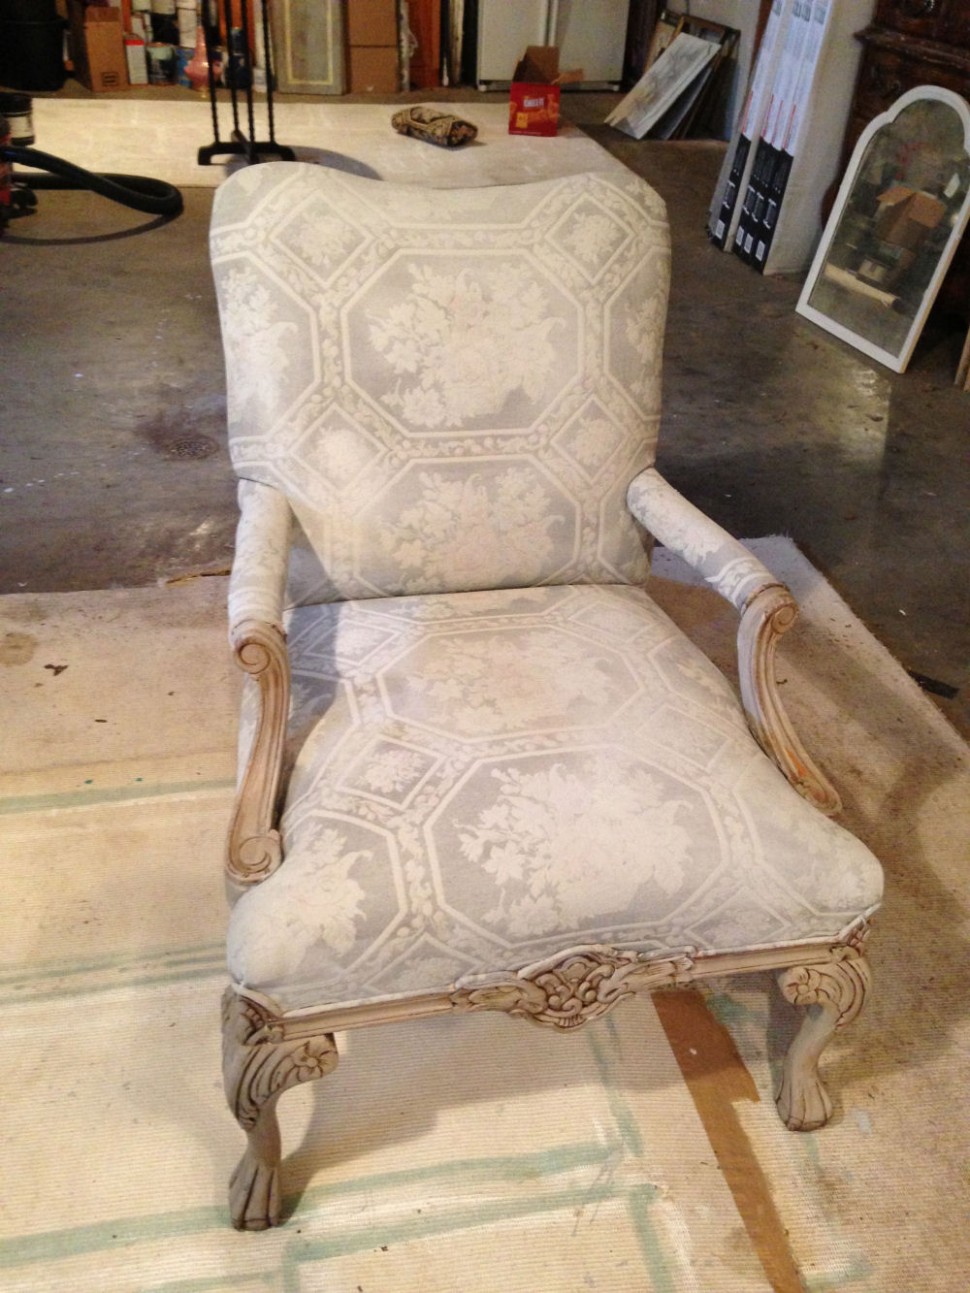 Painting Fabric With Annie Sloan Chalk Paint Where To Buy Annie Sloan Chalk Paint On Long Island